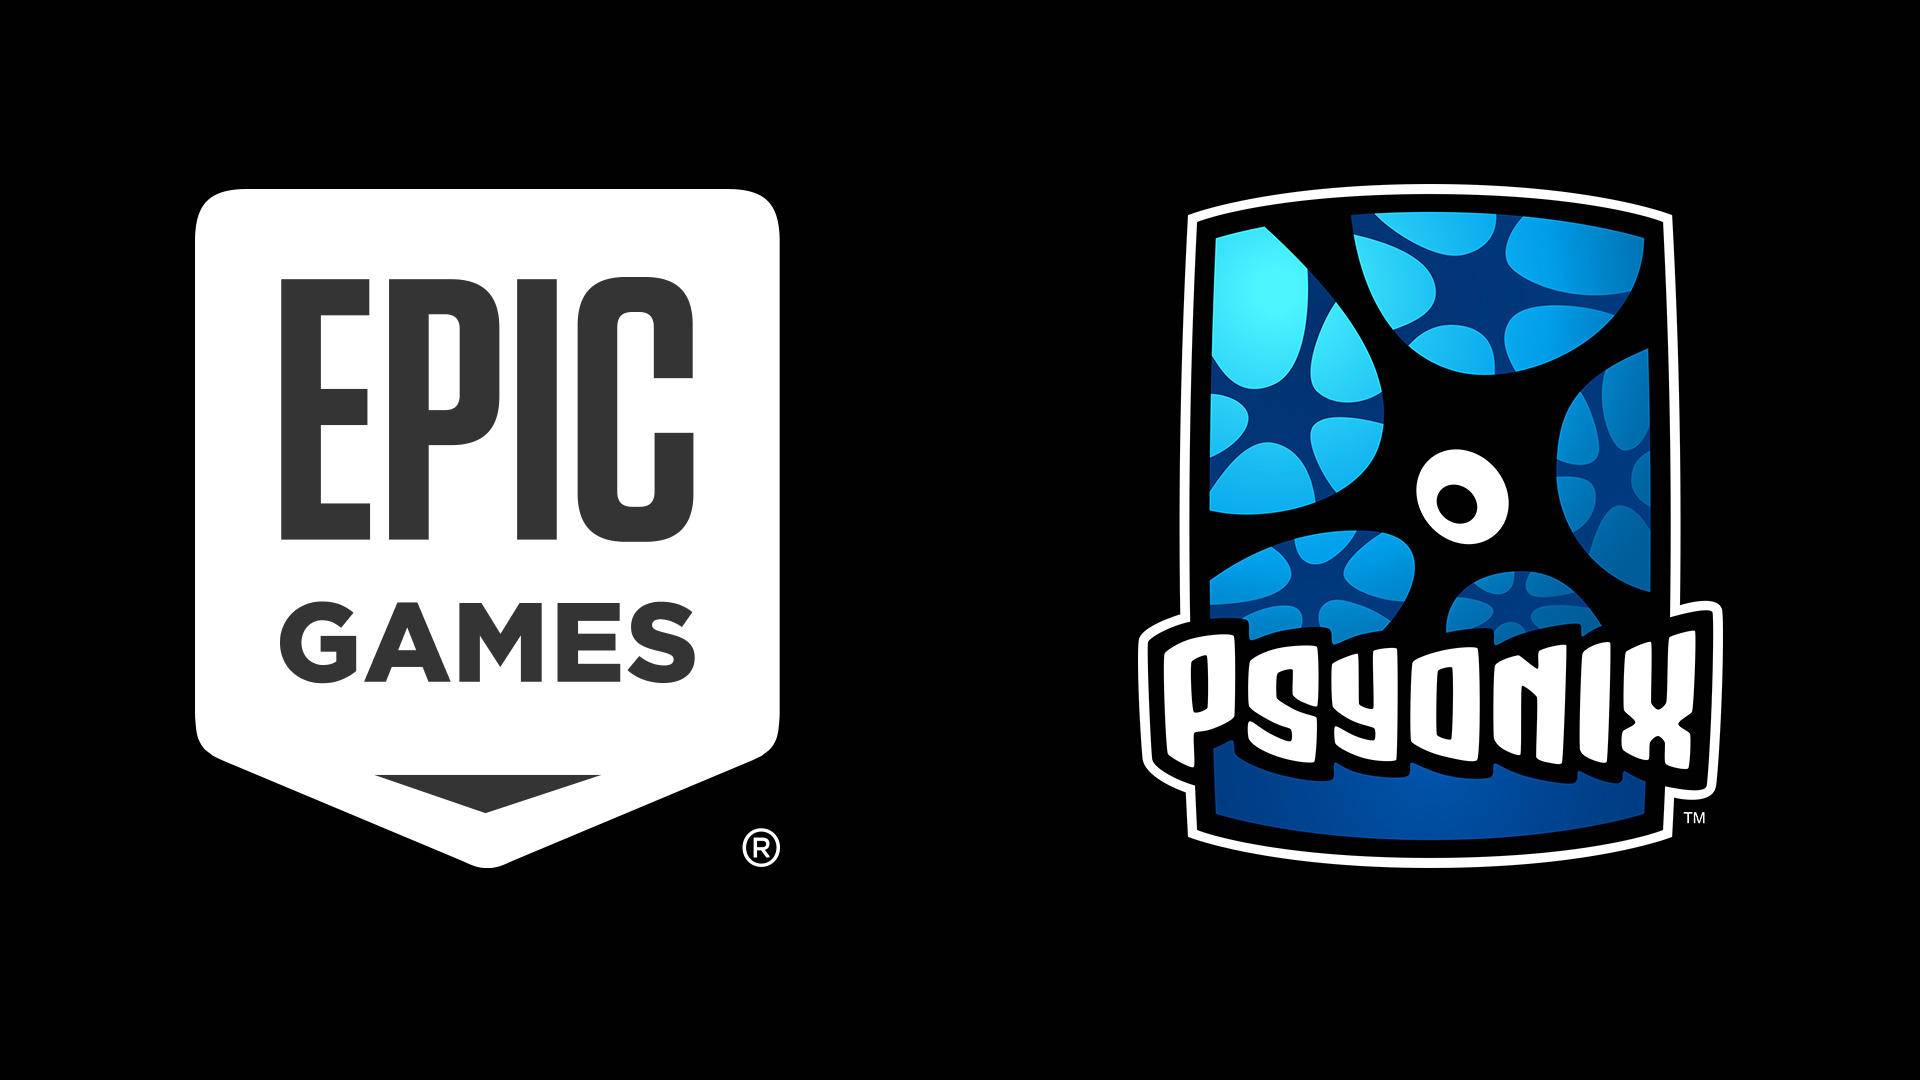 Epic Games buys Psyonix making the future of Rocket League in Steam uncertain